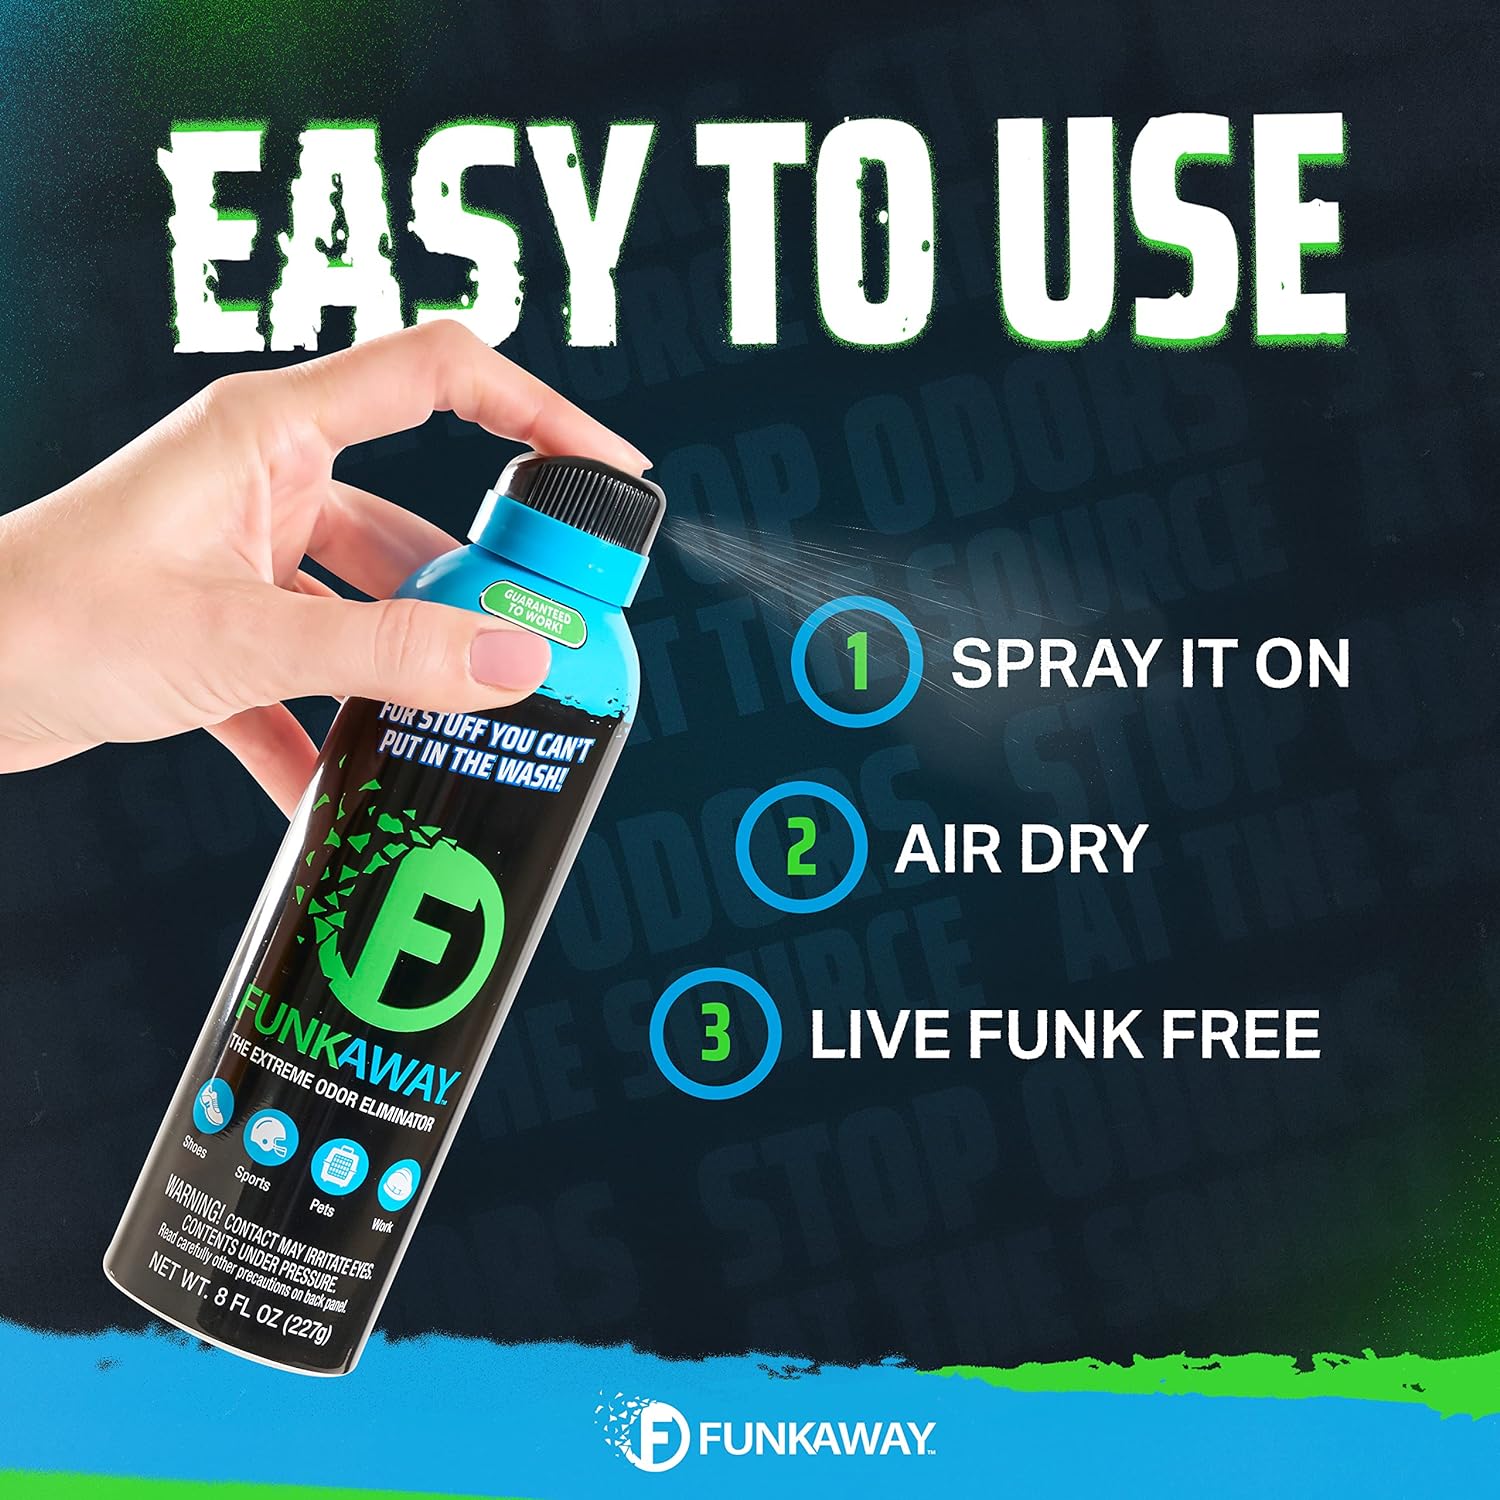 FunkAway Aerosol Spray, 8 oz., 6 Pack, Extreme Odor Eliminator Spray, Ideal for Shoe Smells, Pet Odors and Bulky Stuff that Won't Fit in the Wash; Attacks Musty Odors at the Source : Health & Household